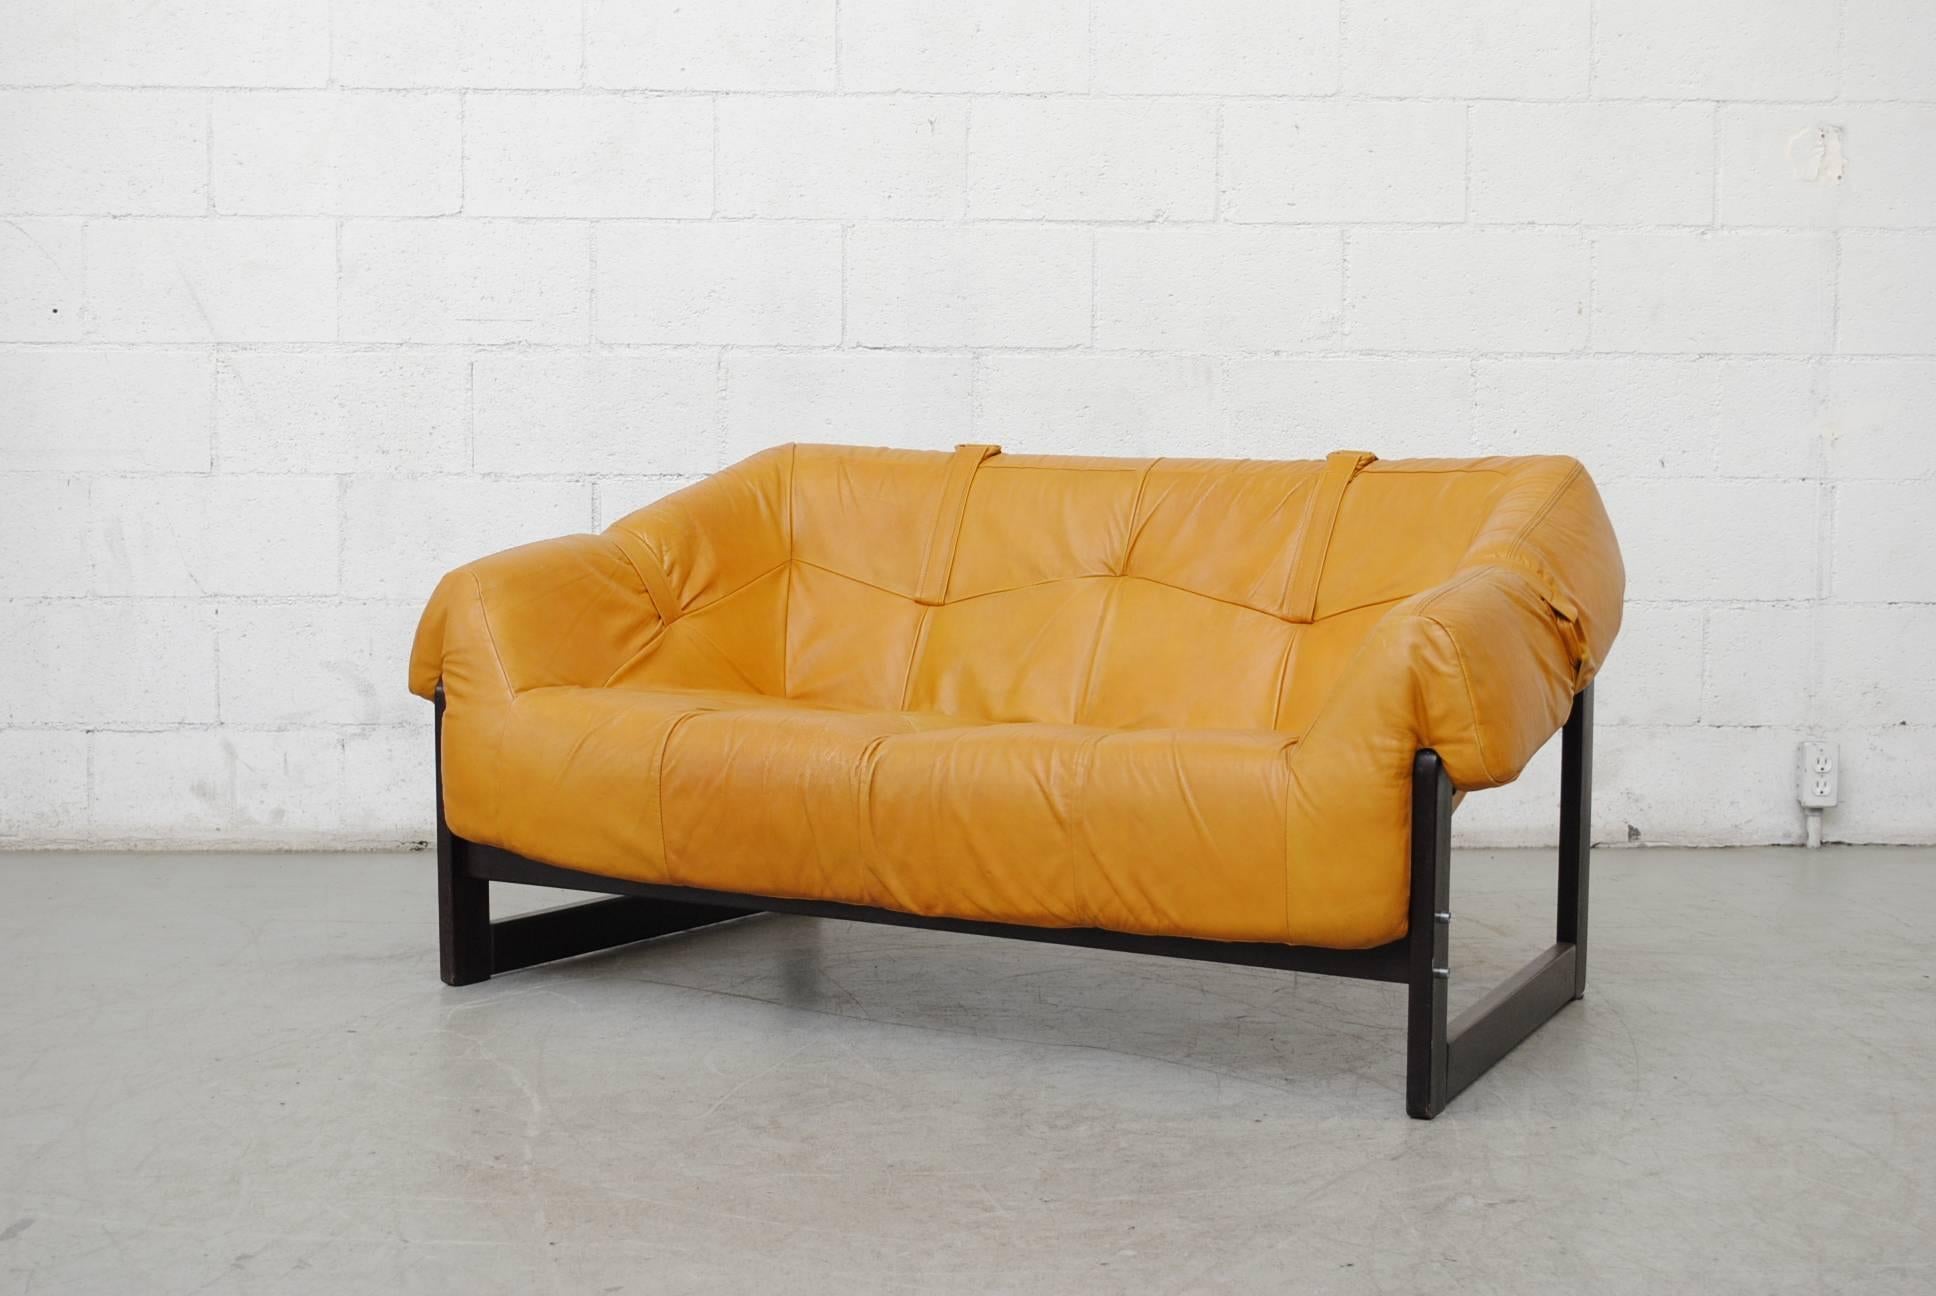 Beautiful caramel leather loveseat by Percival Lafer with leather strap support and original wood frame. Good original condition.